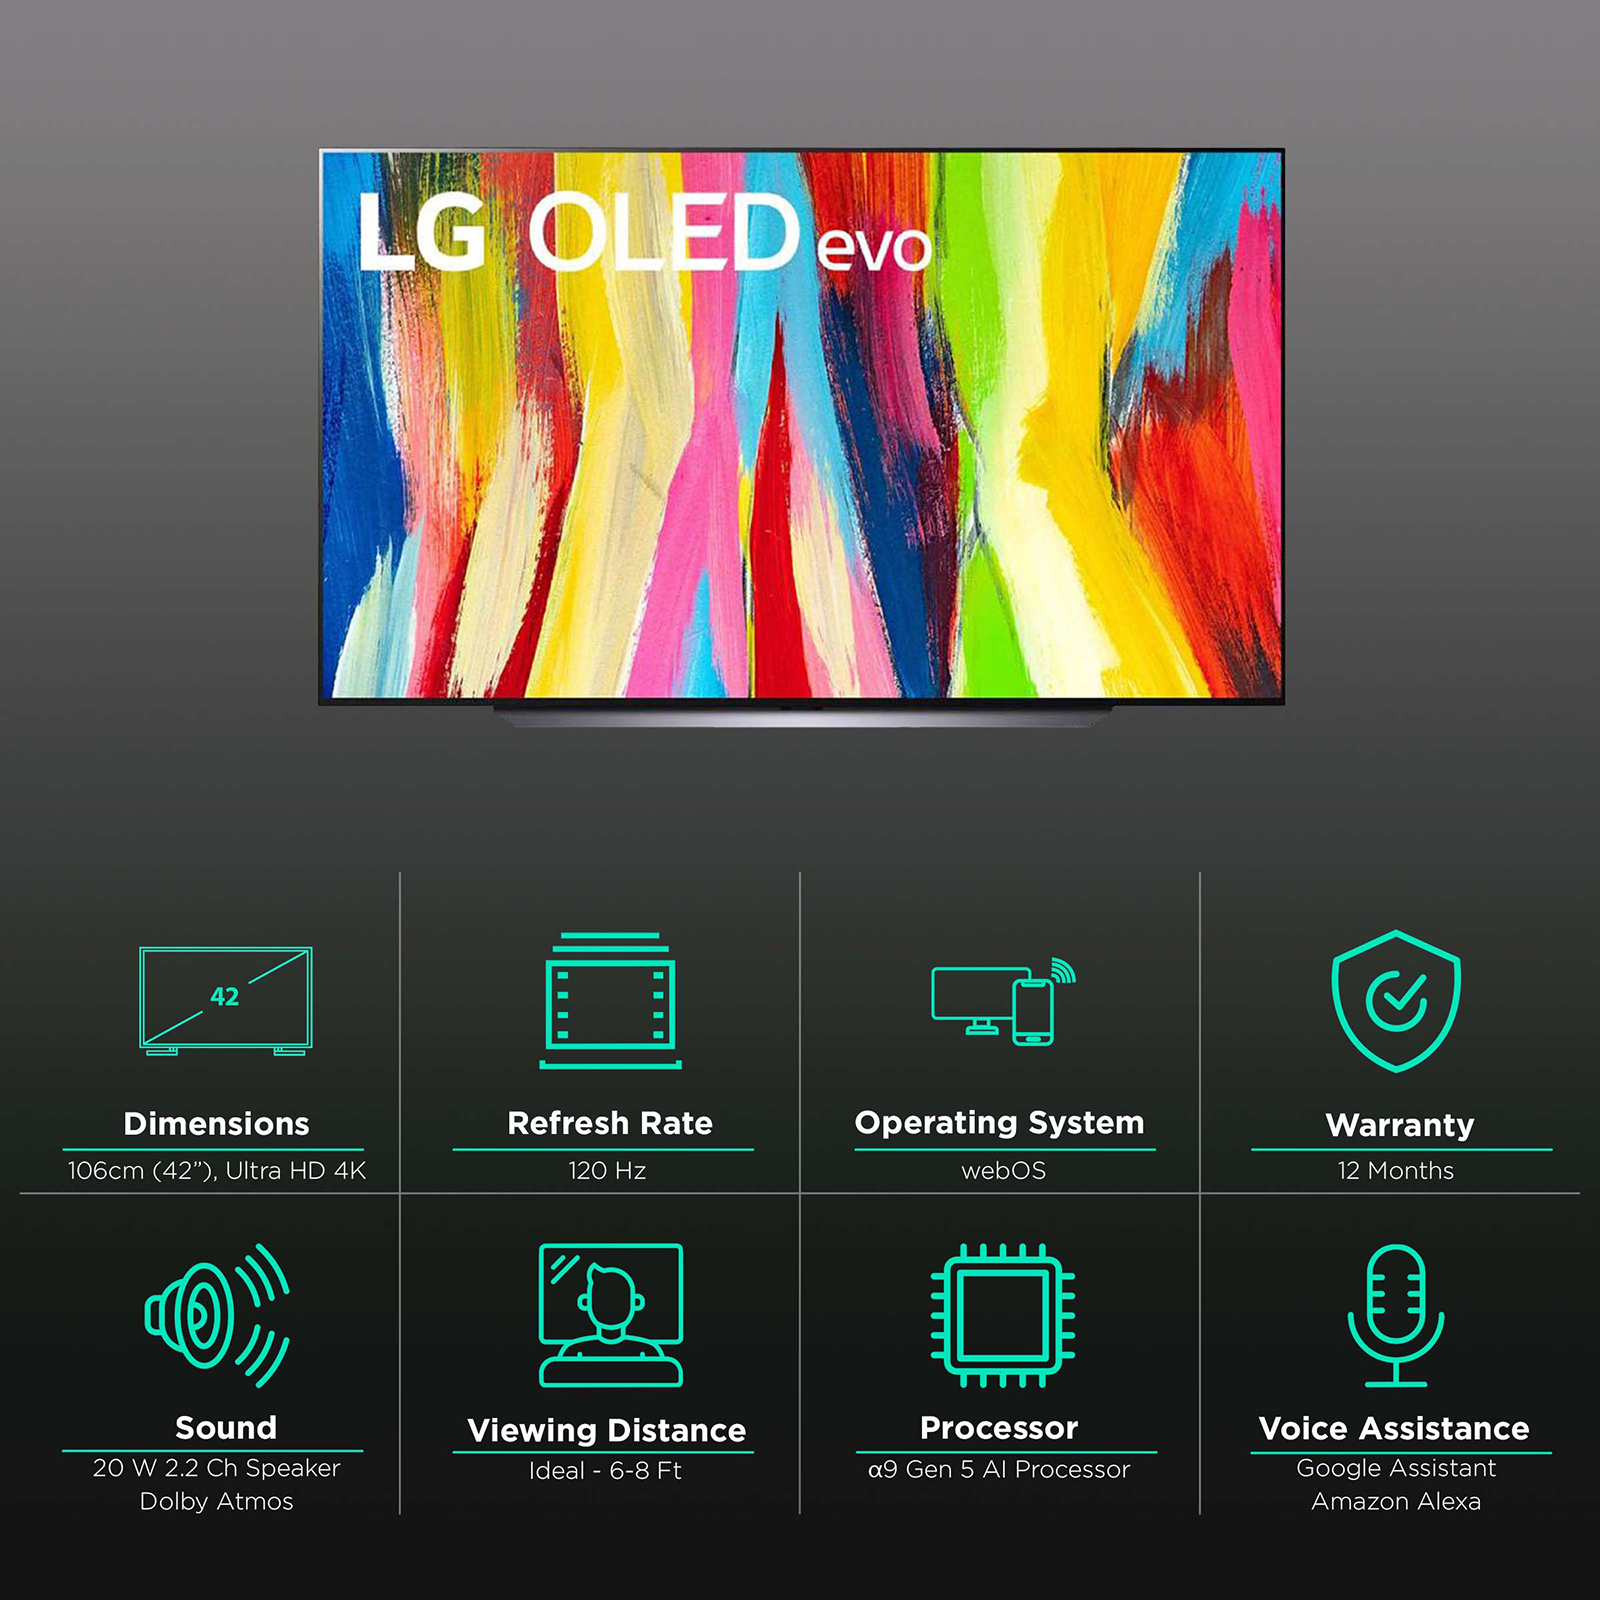 LG 106 cm (42 inch) OLED Ultra HD (4K) Smart WebOS TV Online at best Prices  In India